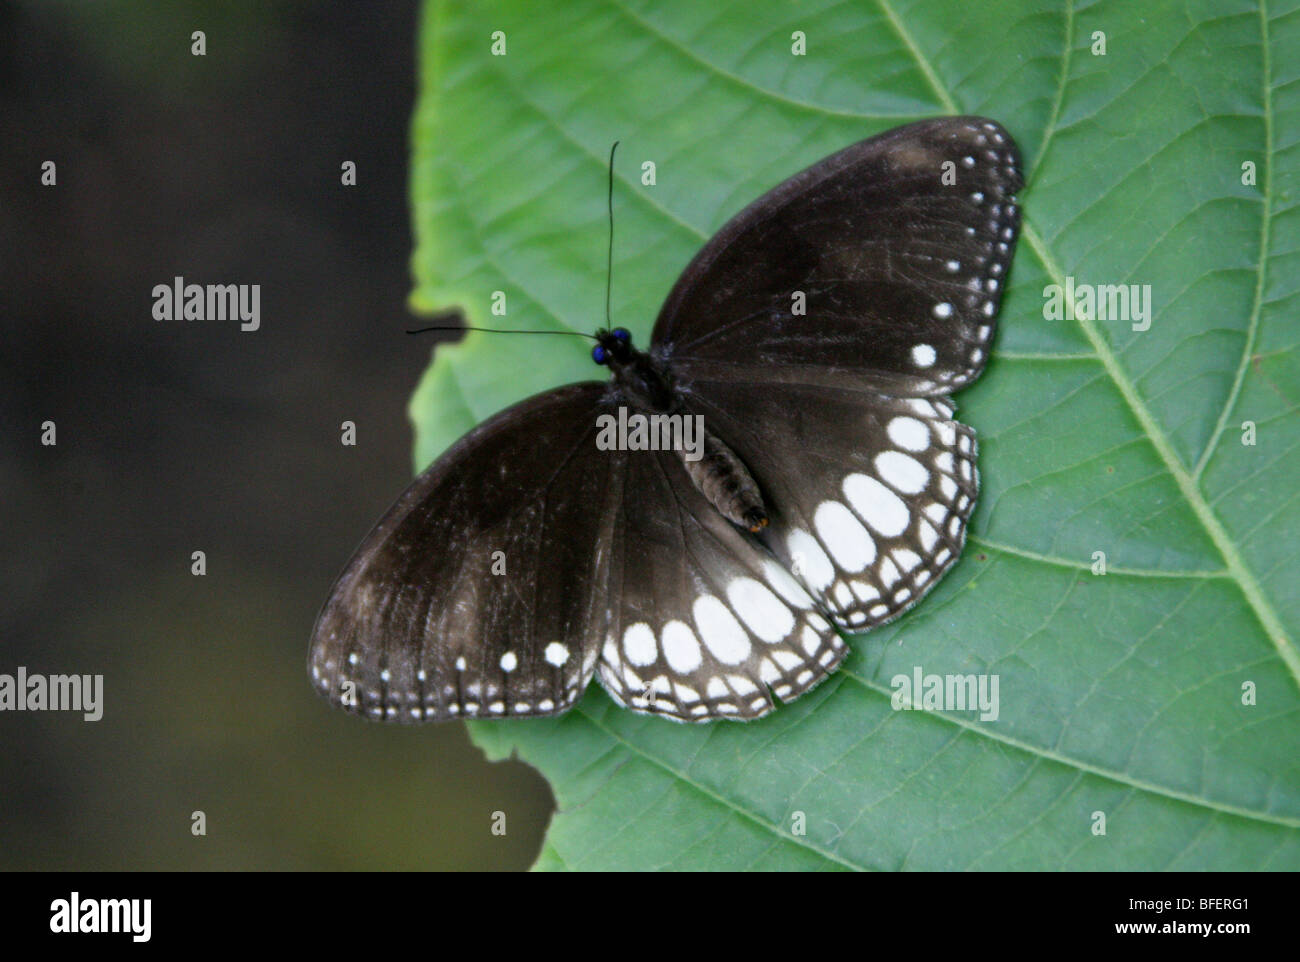 Black and White Nymphalid Butterfly, Nymphalidae. Stock Photo